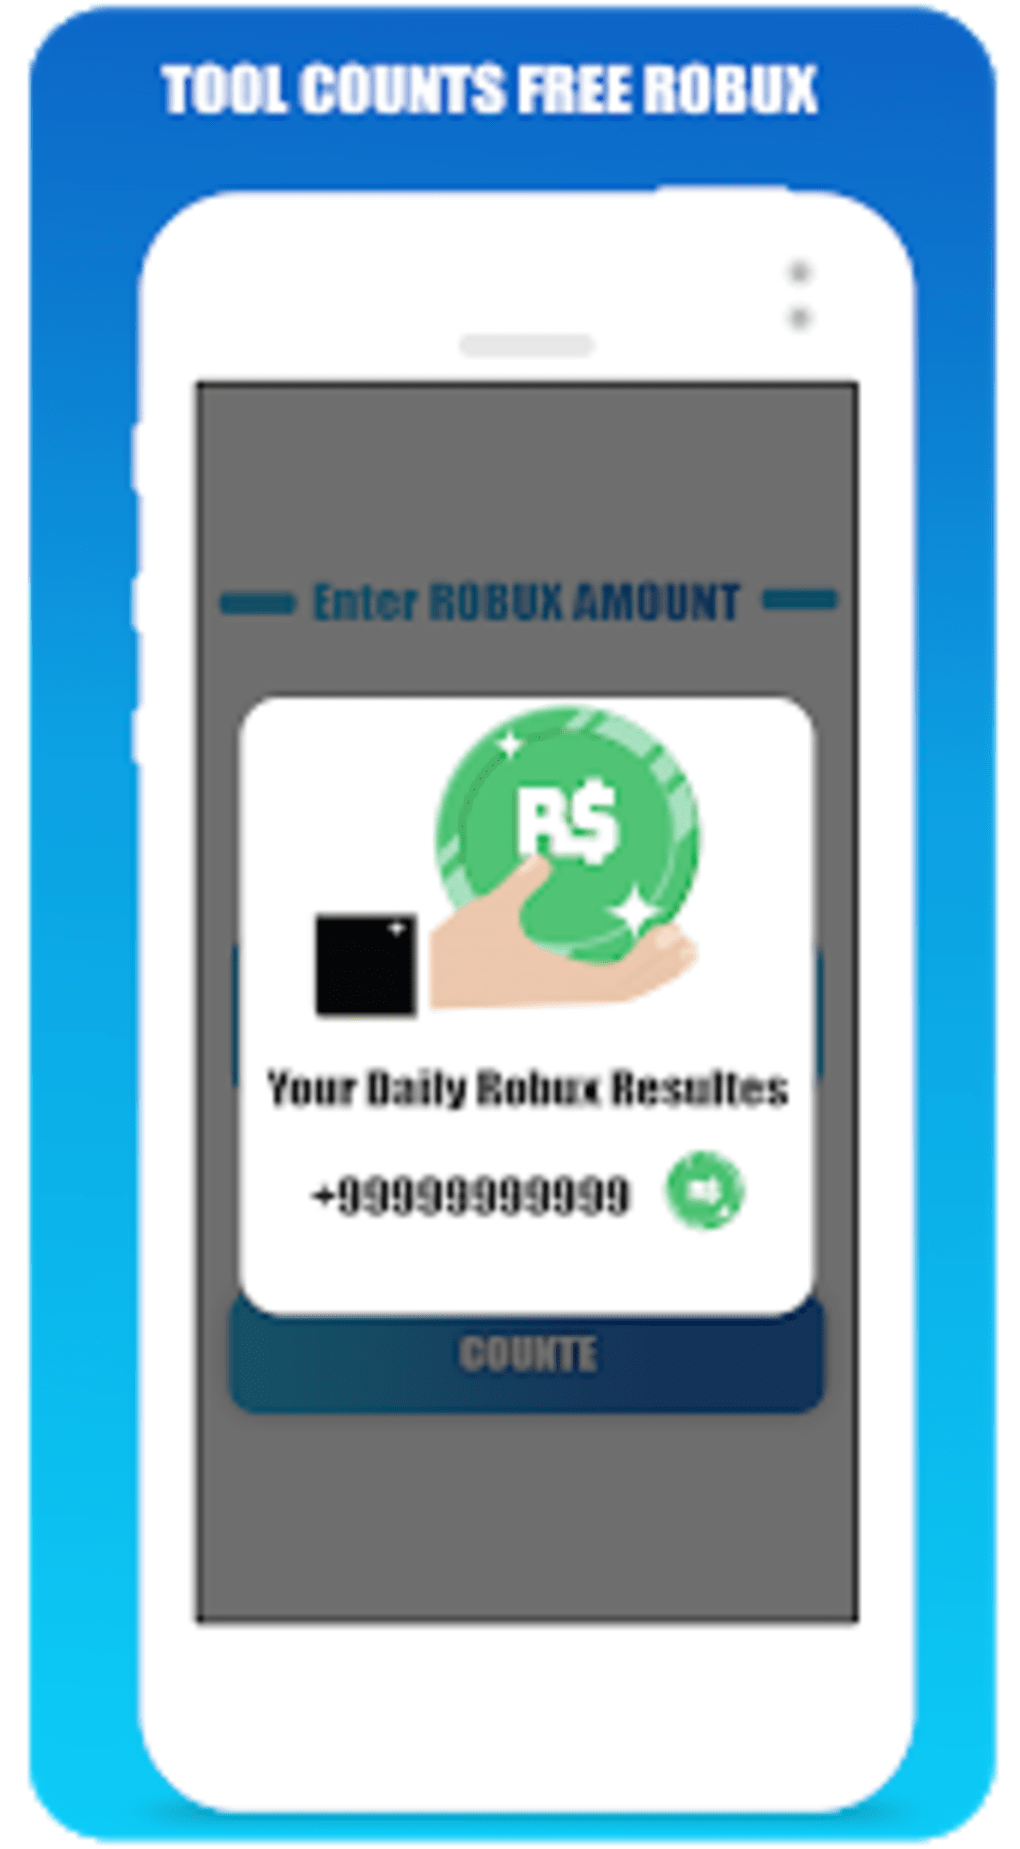 Free Robux Counter For Roblox Apk For Android Download - how to get free robux tips apk app free download for android